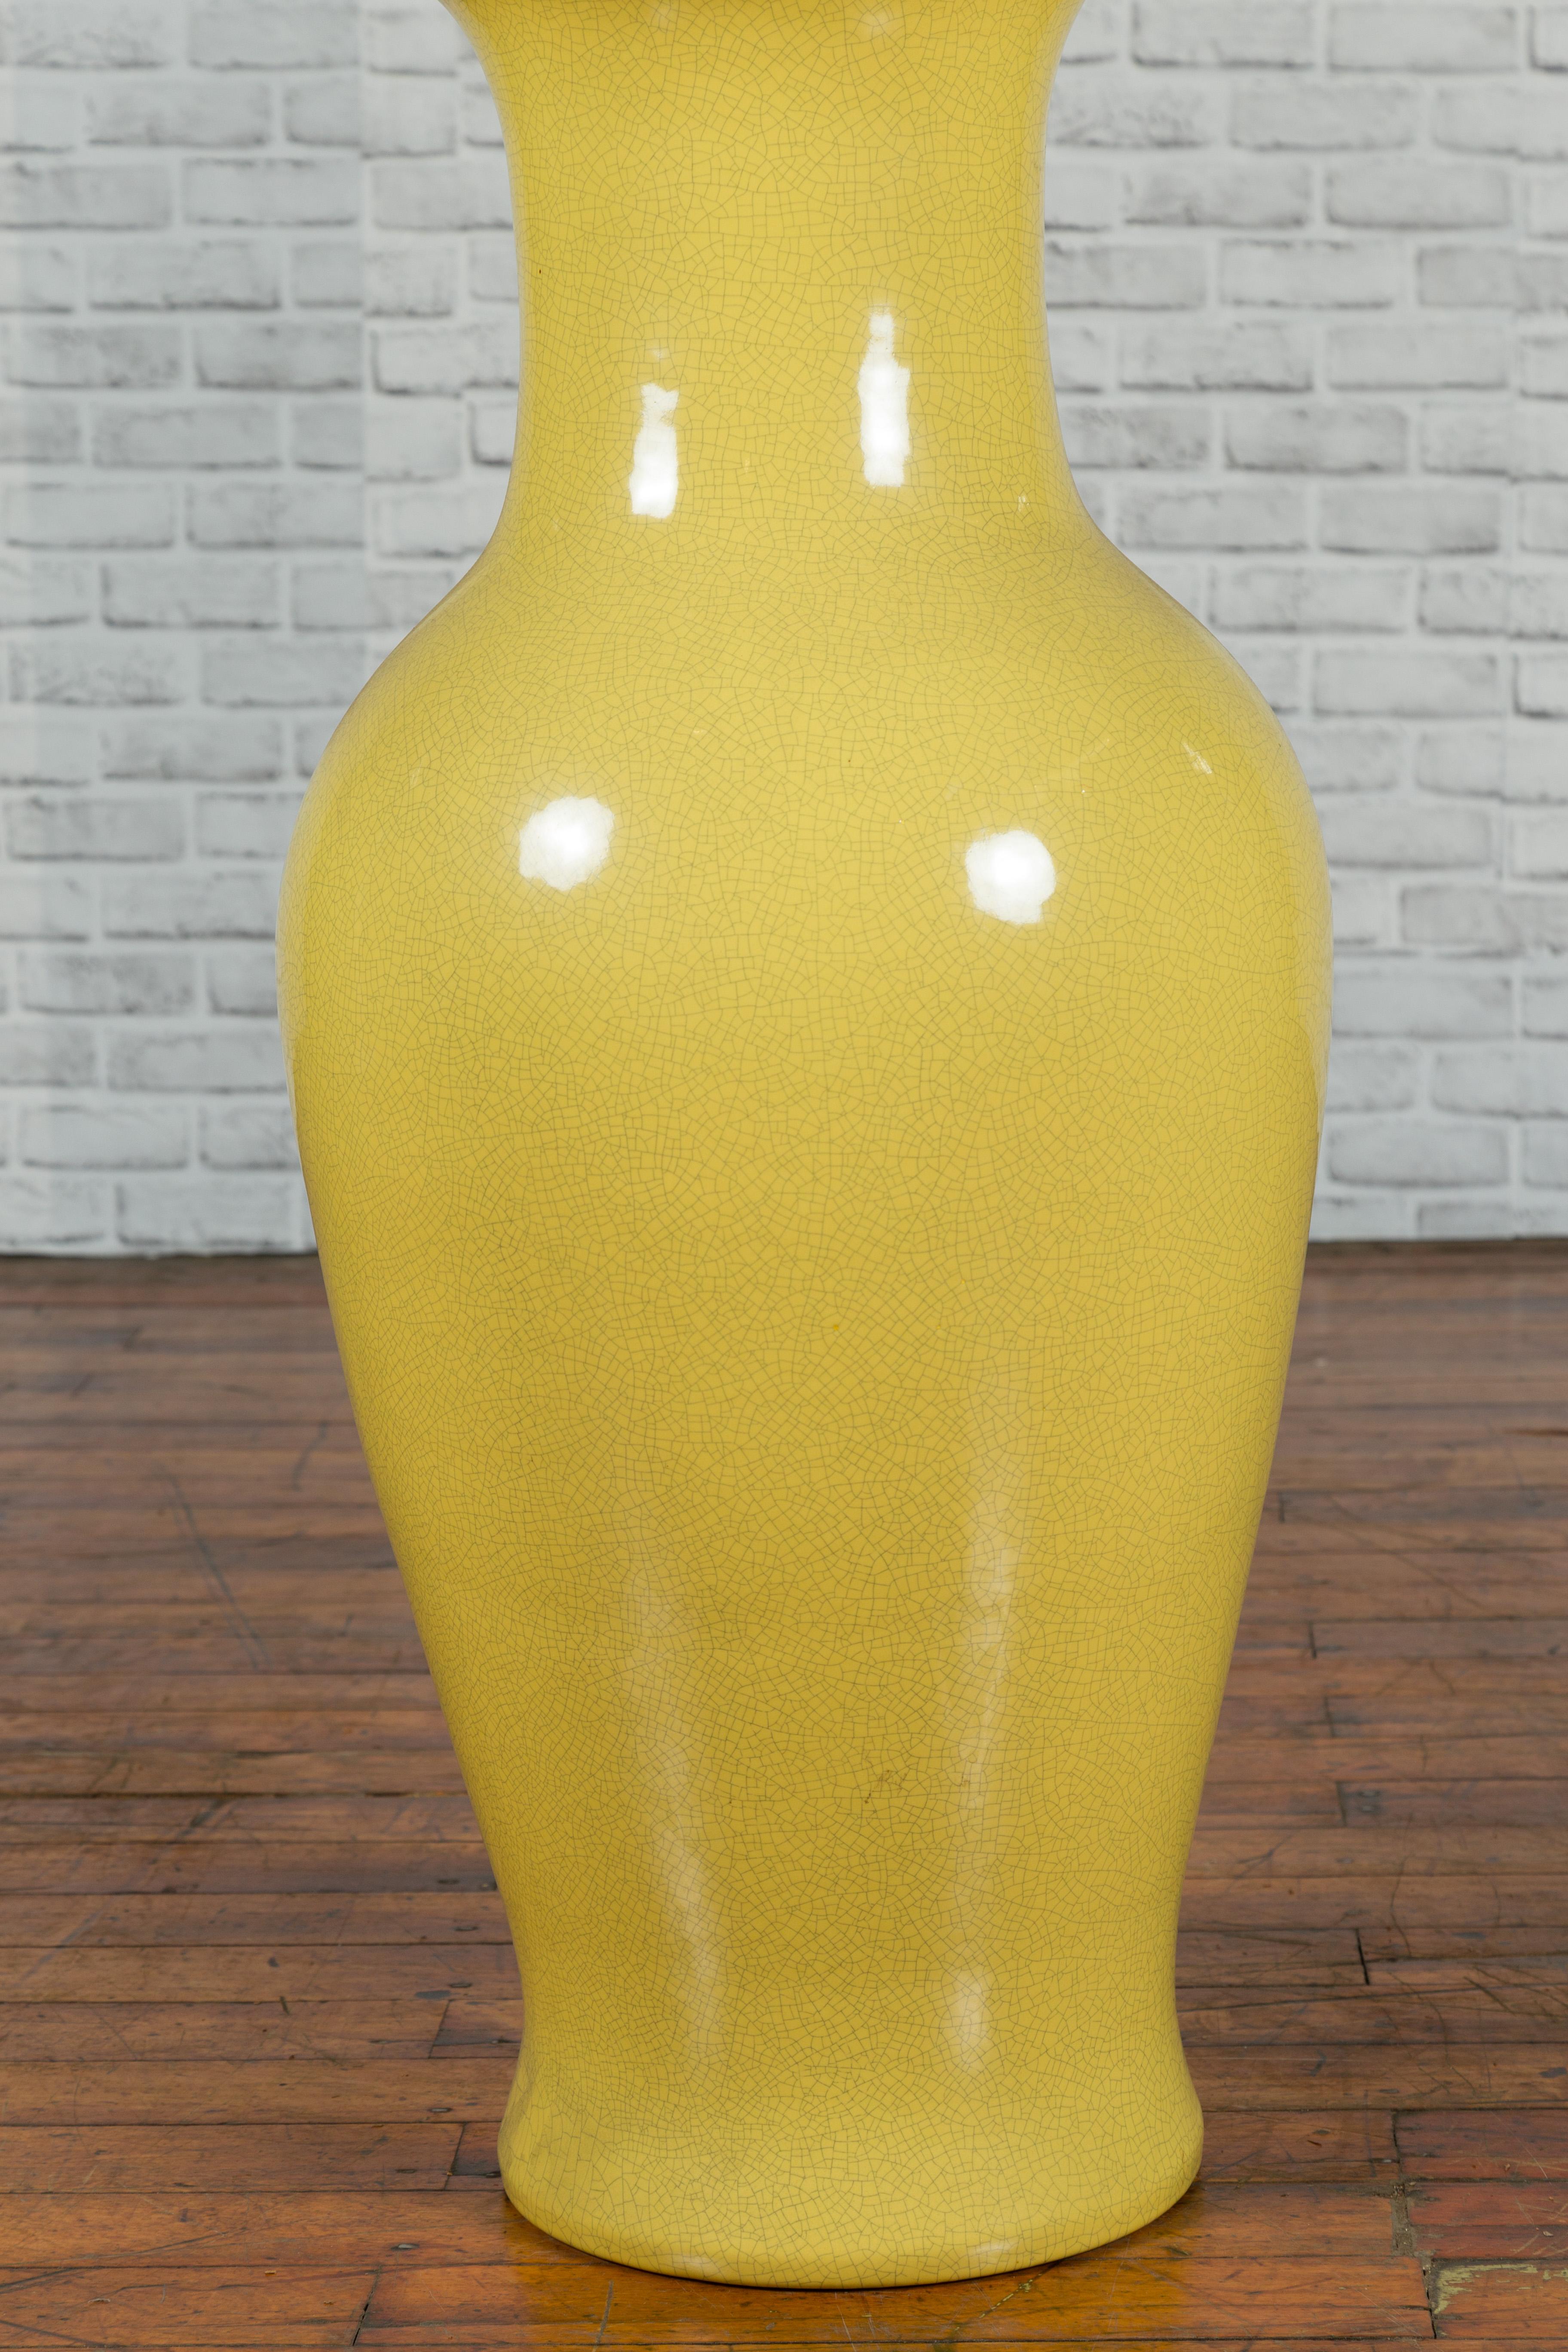 20th Century Chinese Extra Large Vintage Vase with Yellow Crackled Finish and Flaring Mouth